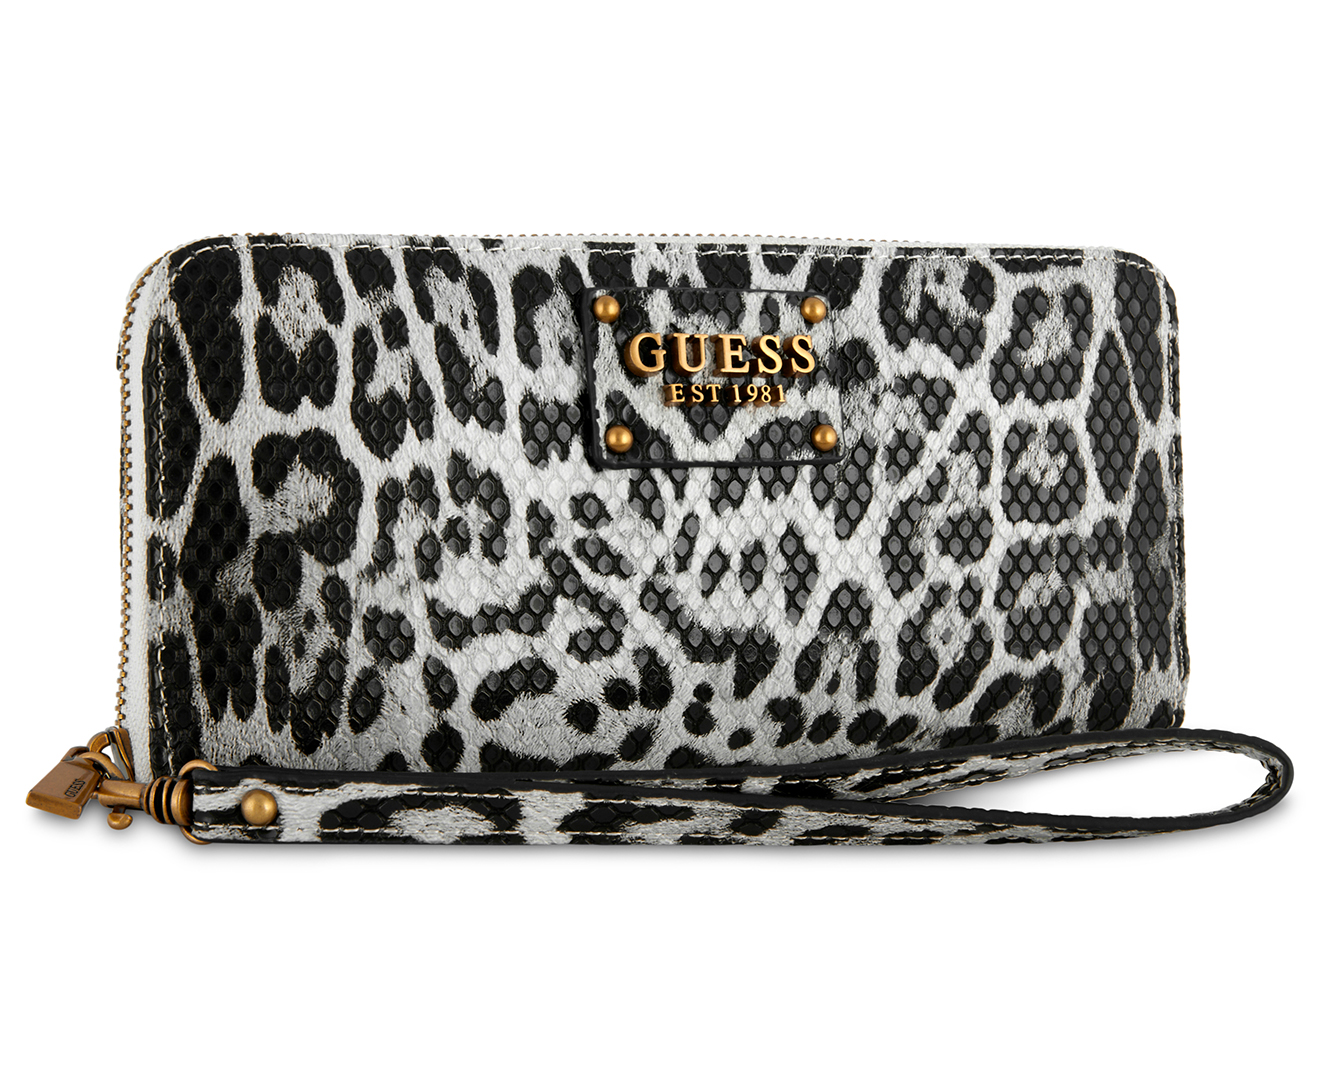 Guess Centre Stage Top Zip Clutch - Black/White Leopard